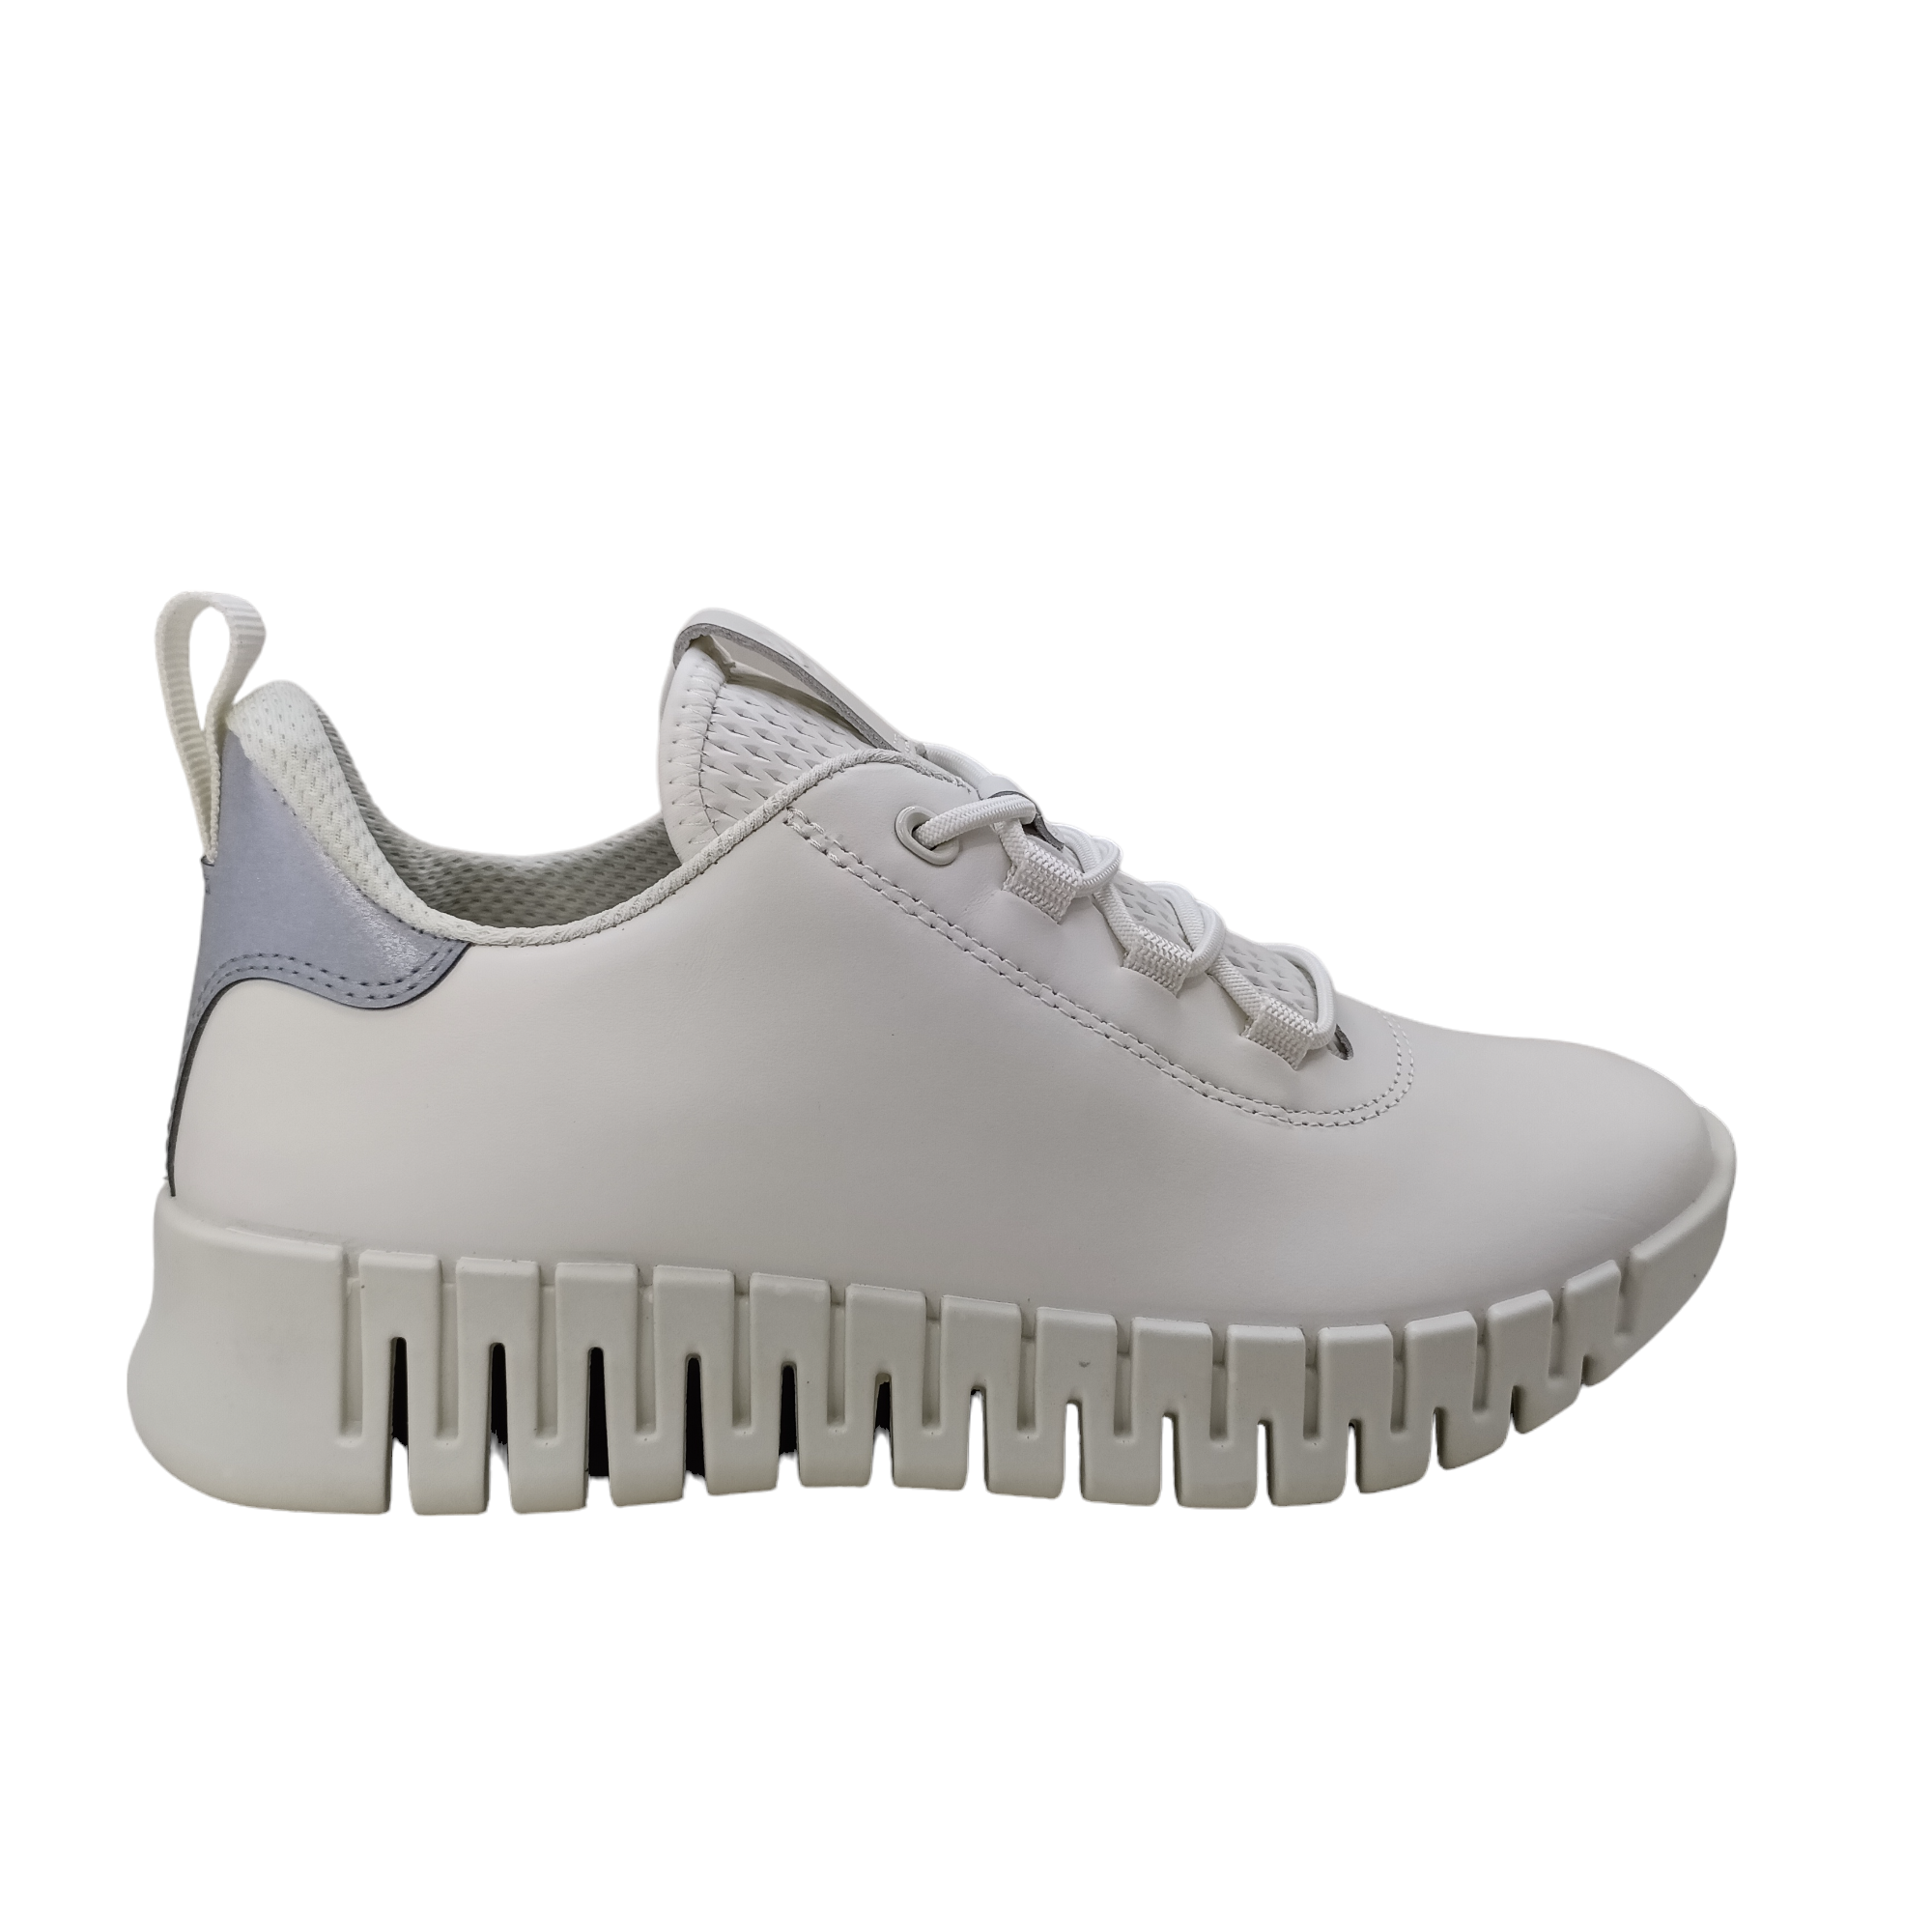 Shop Gruuv Sneaker W - with shoe&amp;me - from Ecco - Sneakers - Sneaker, Winter, Womens